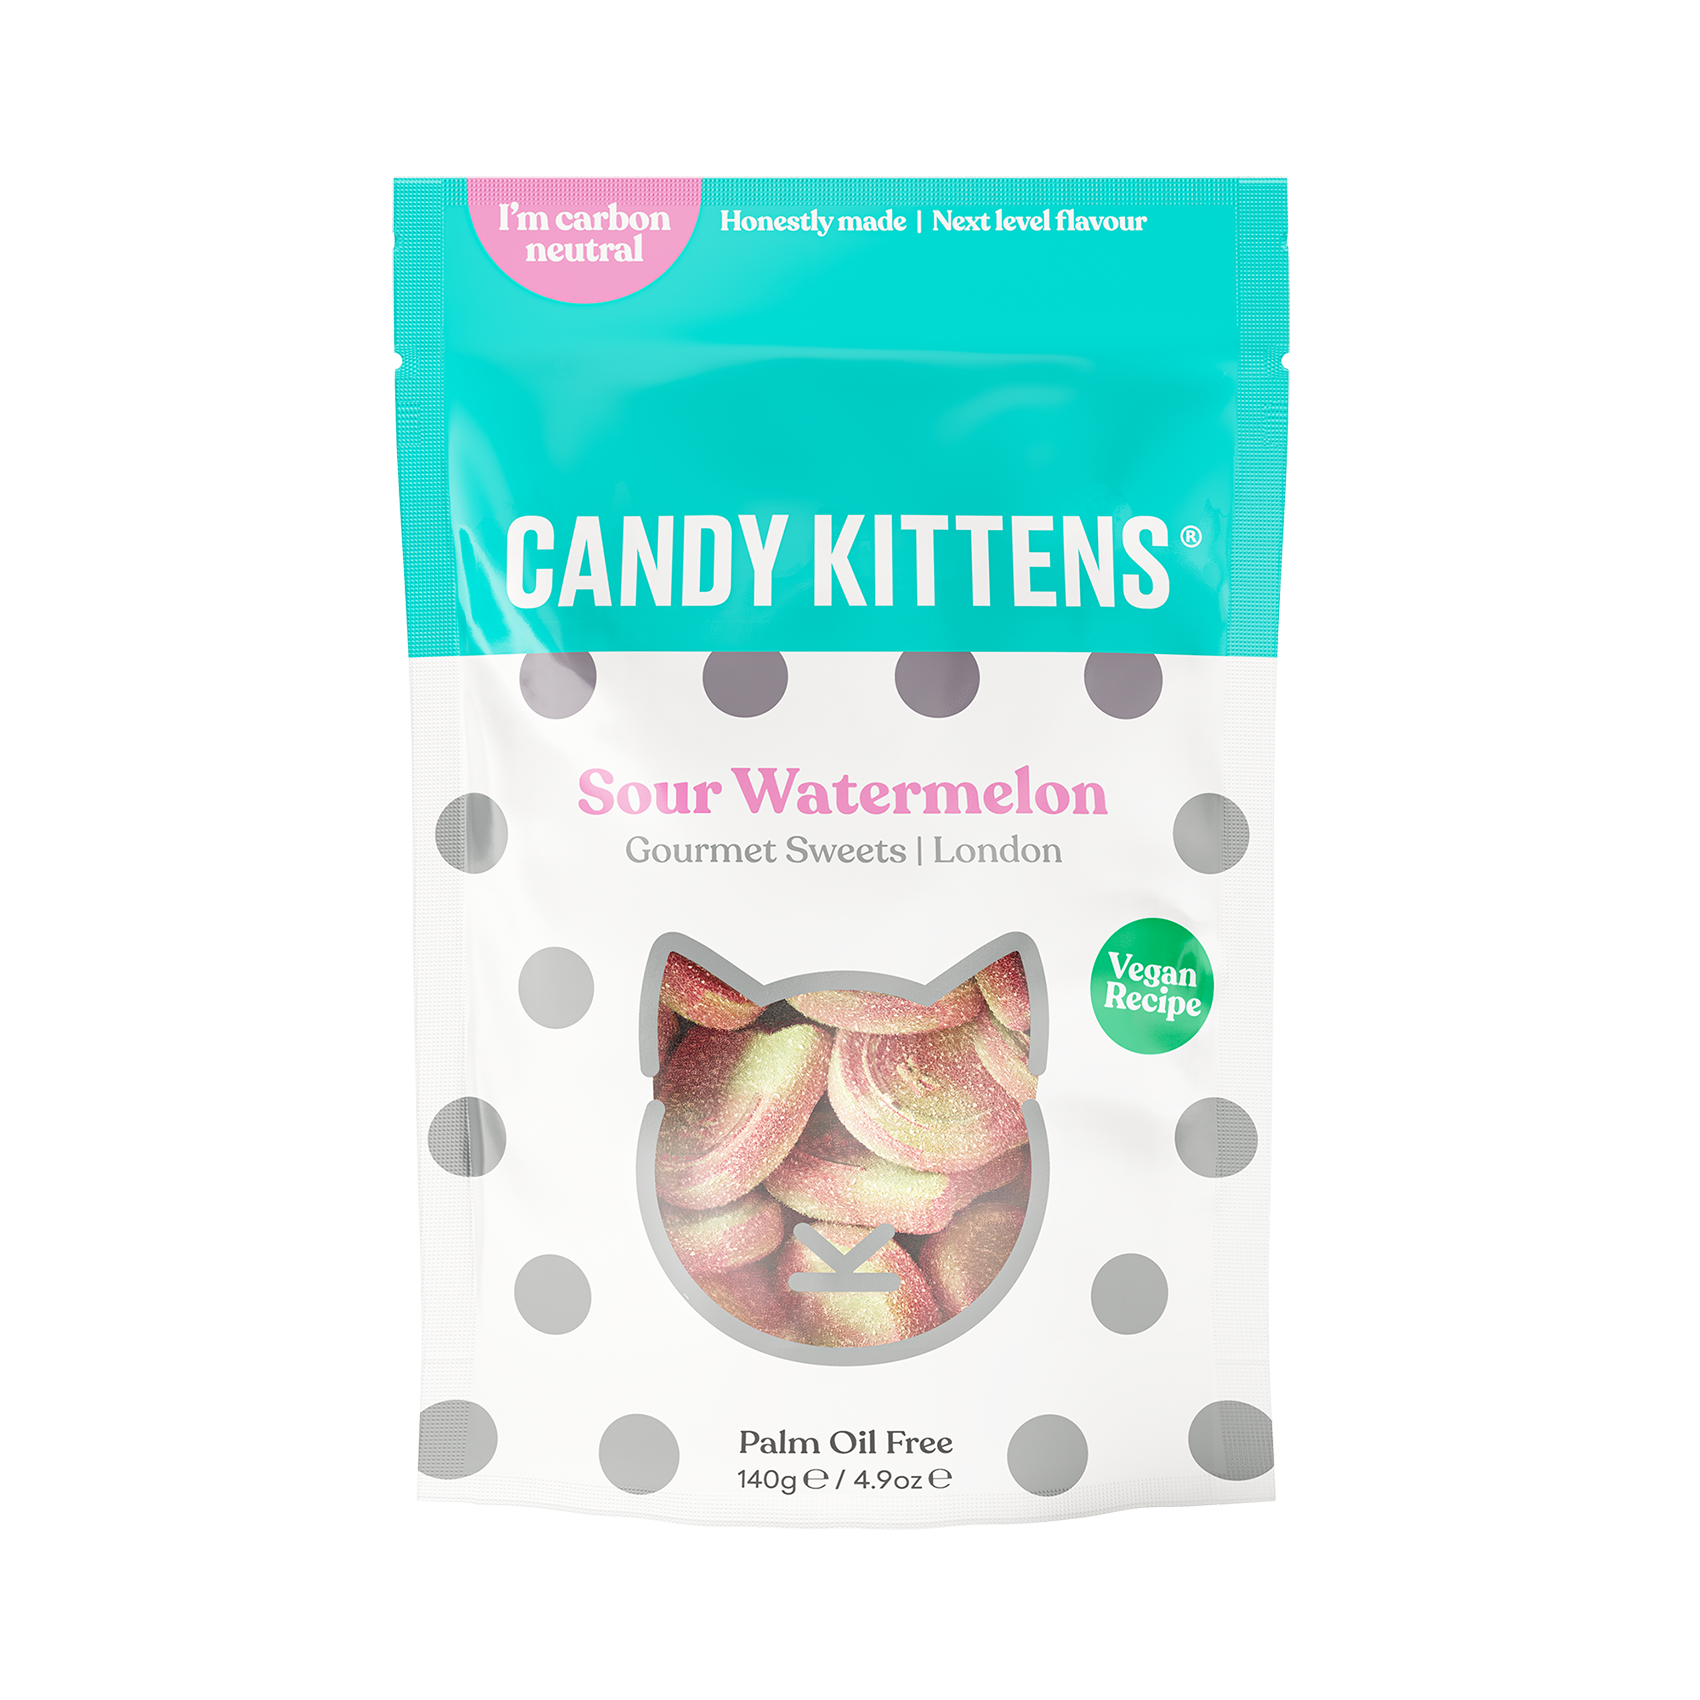 Candy Kittens Gourmet Sweets Sharing Bag Sour Watermelon 145g RRP £3 CLEARANCE XL £1.99 or 2 for £3